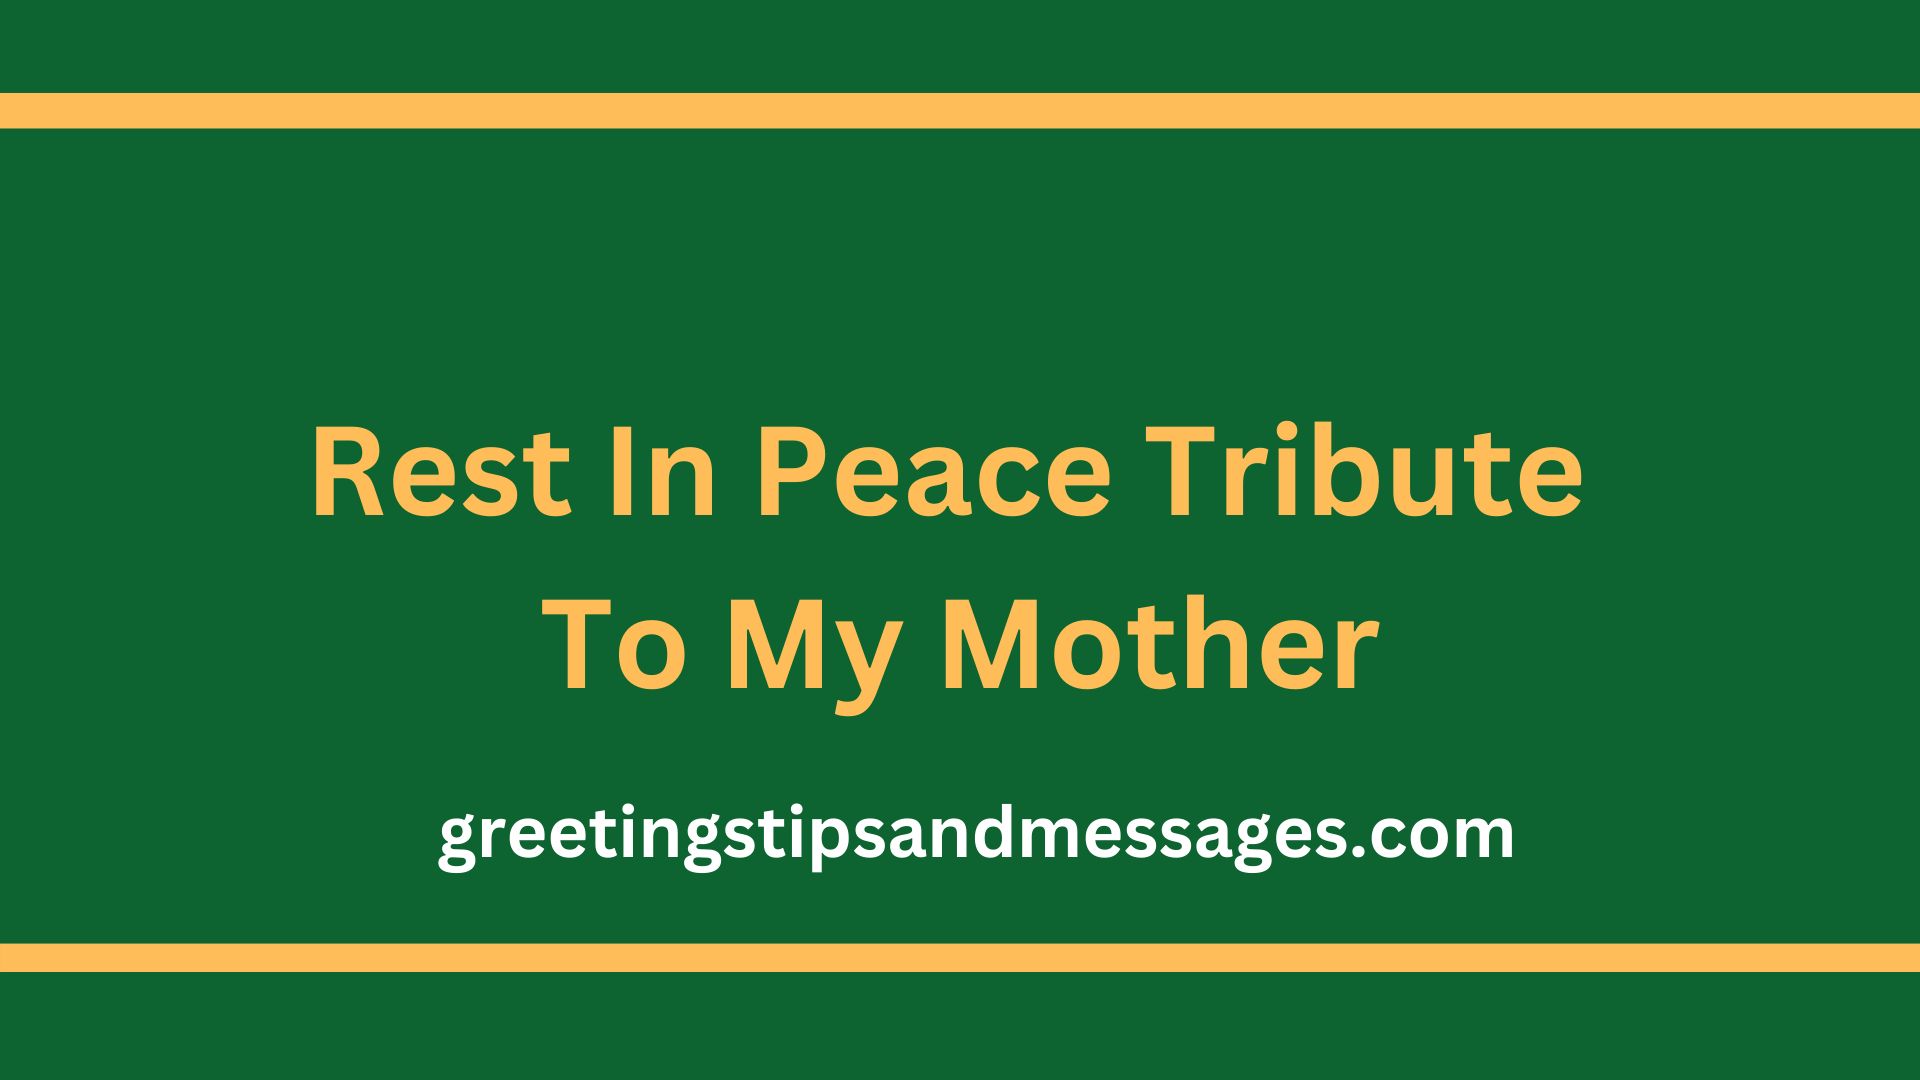 Rest In Peace Tribute To My Mother